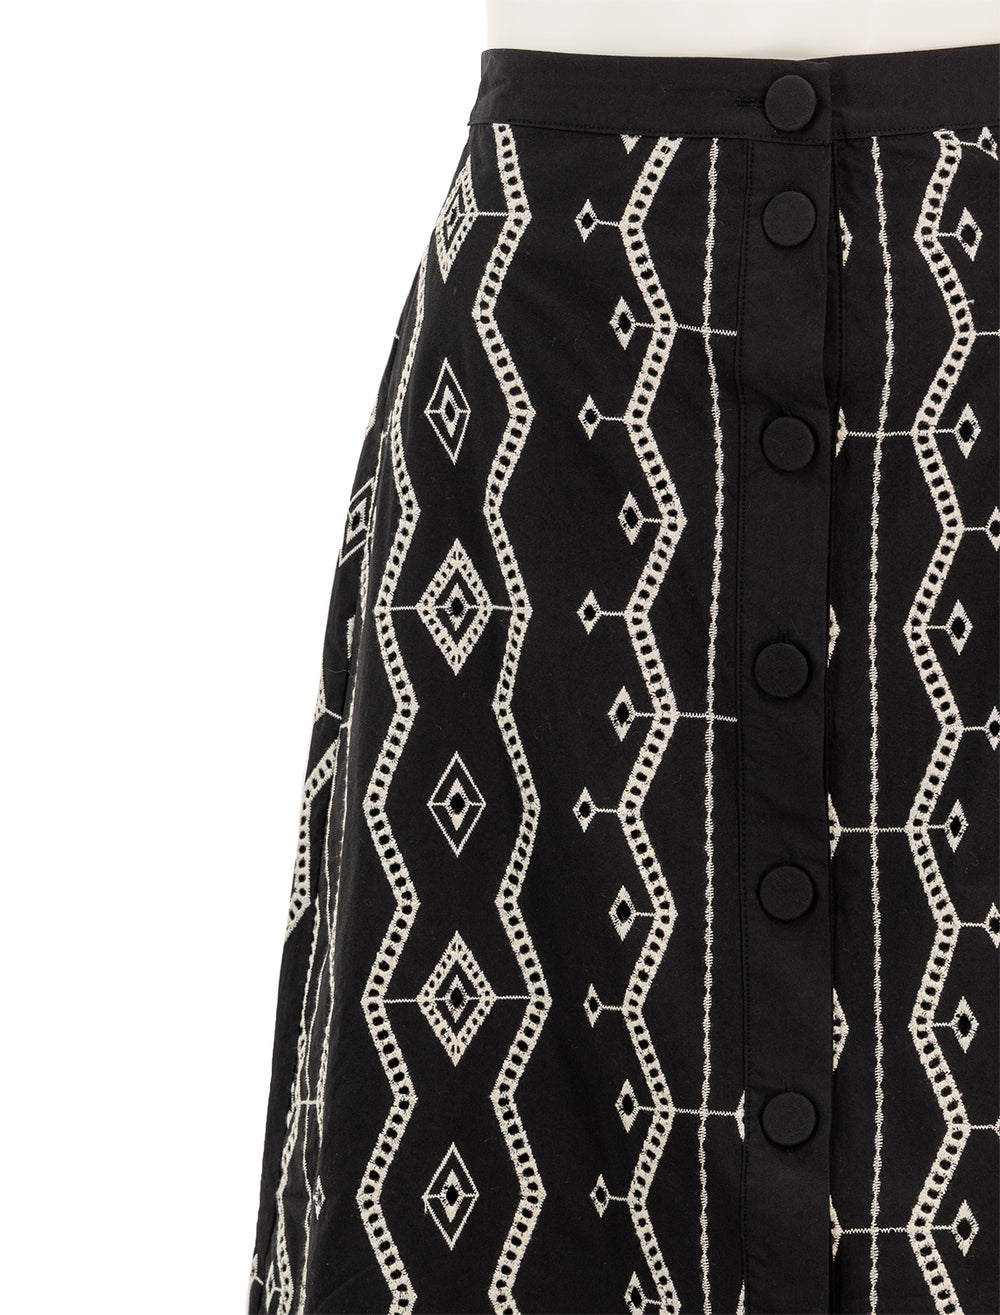 Close-up view of Suncoo Paris' first eyelet skirt in noir.